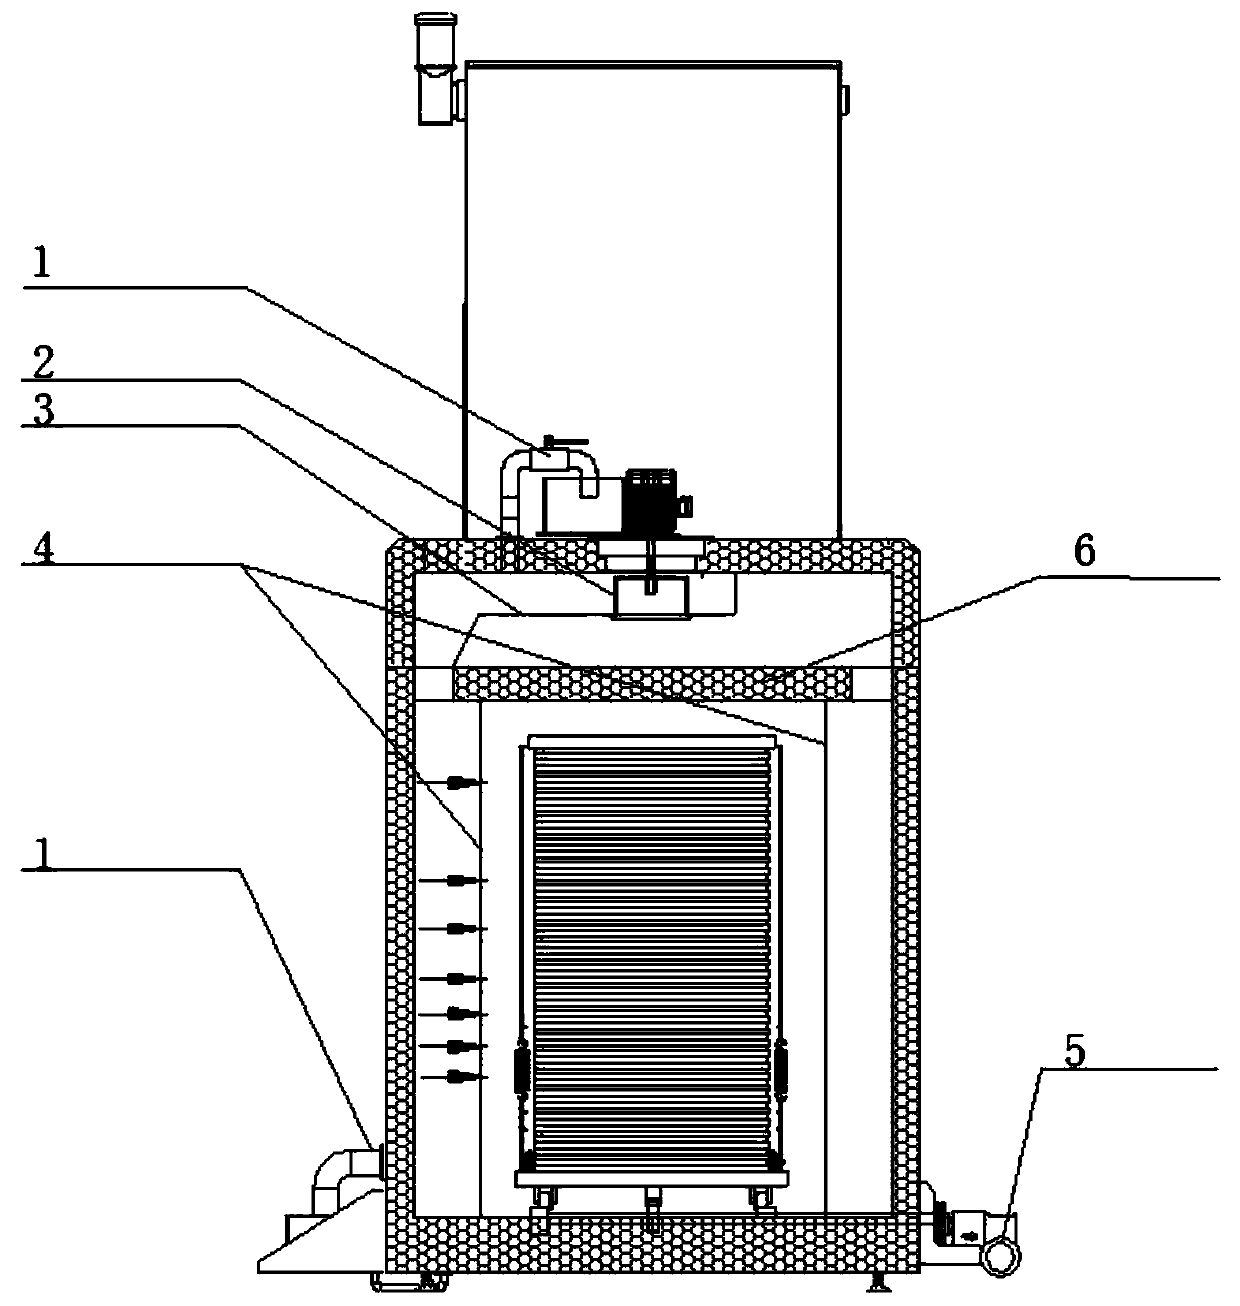 Continuous wood modification heat treatment process and system